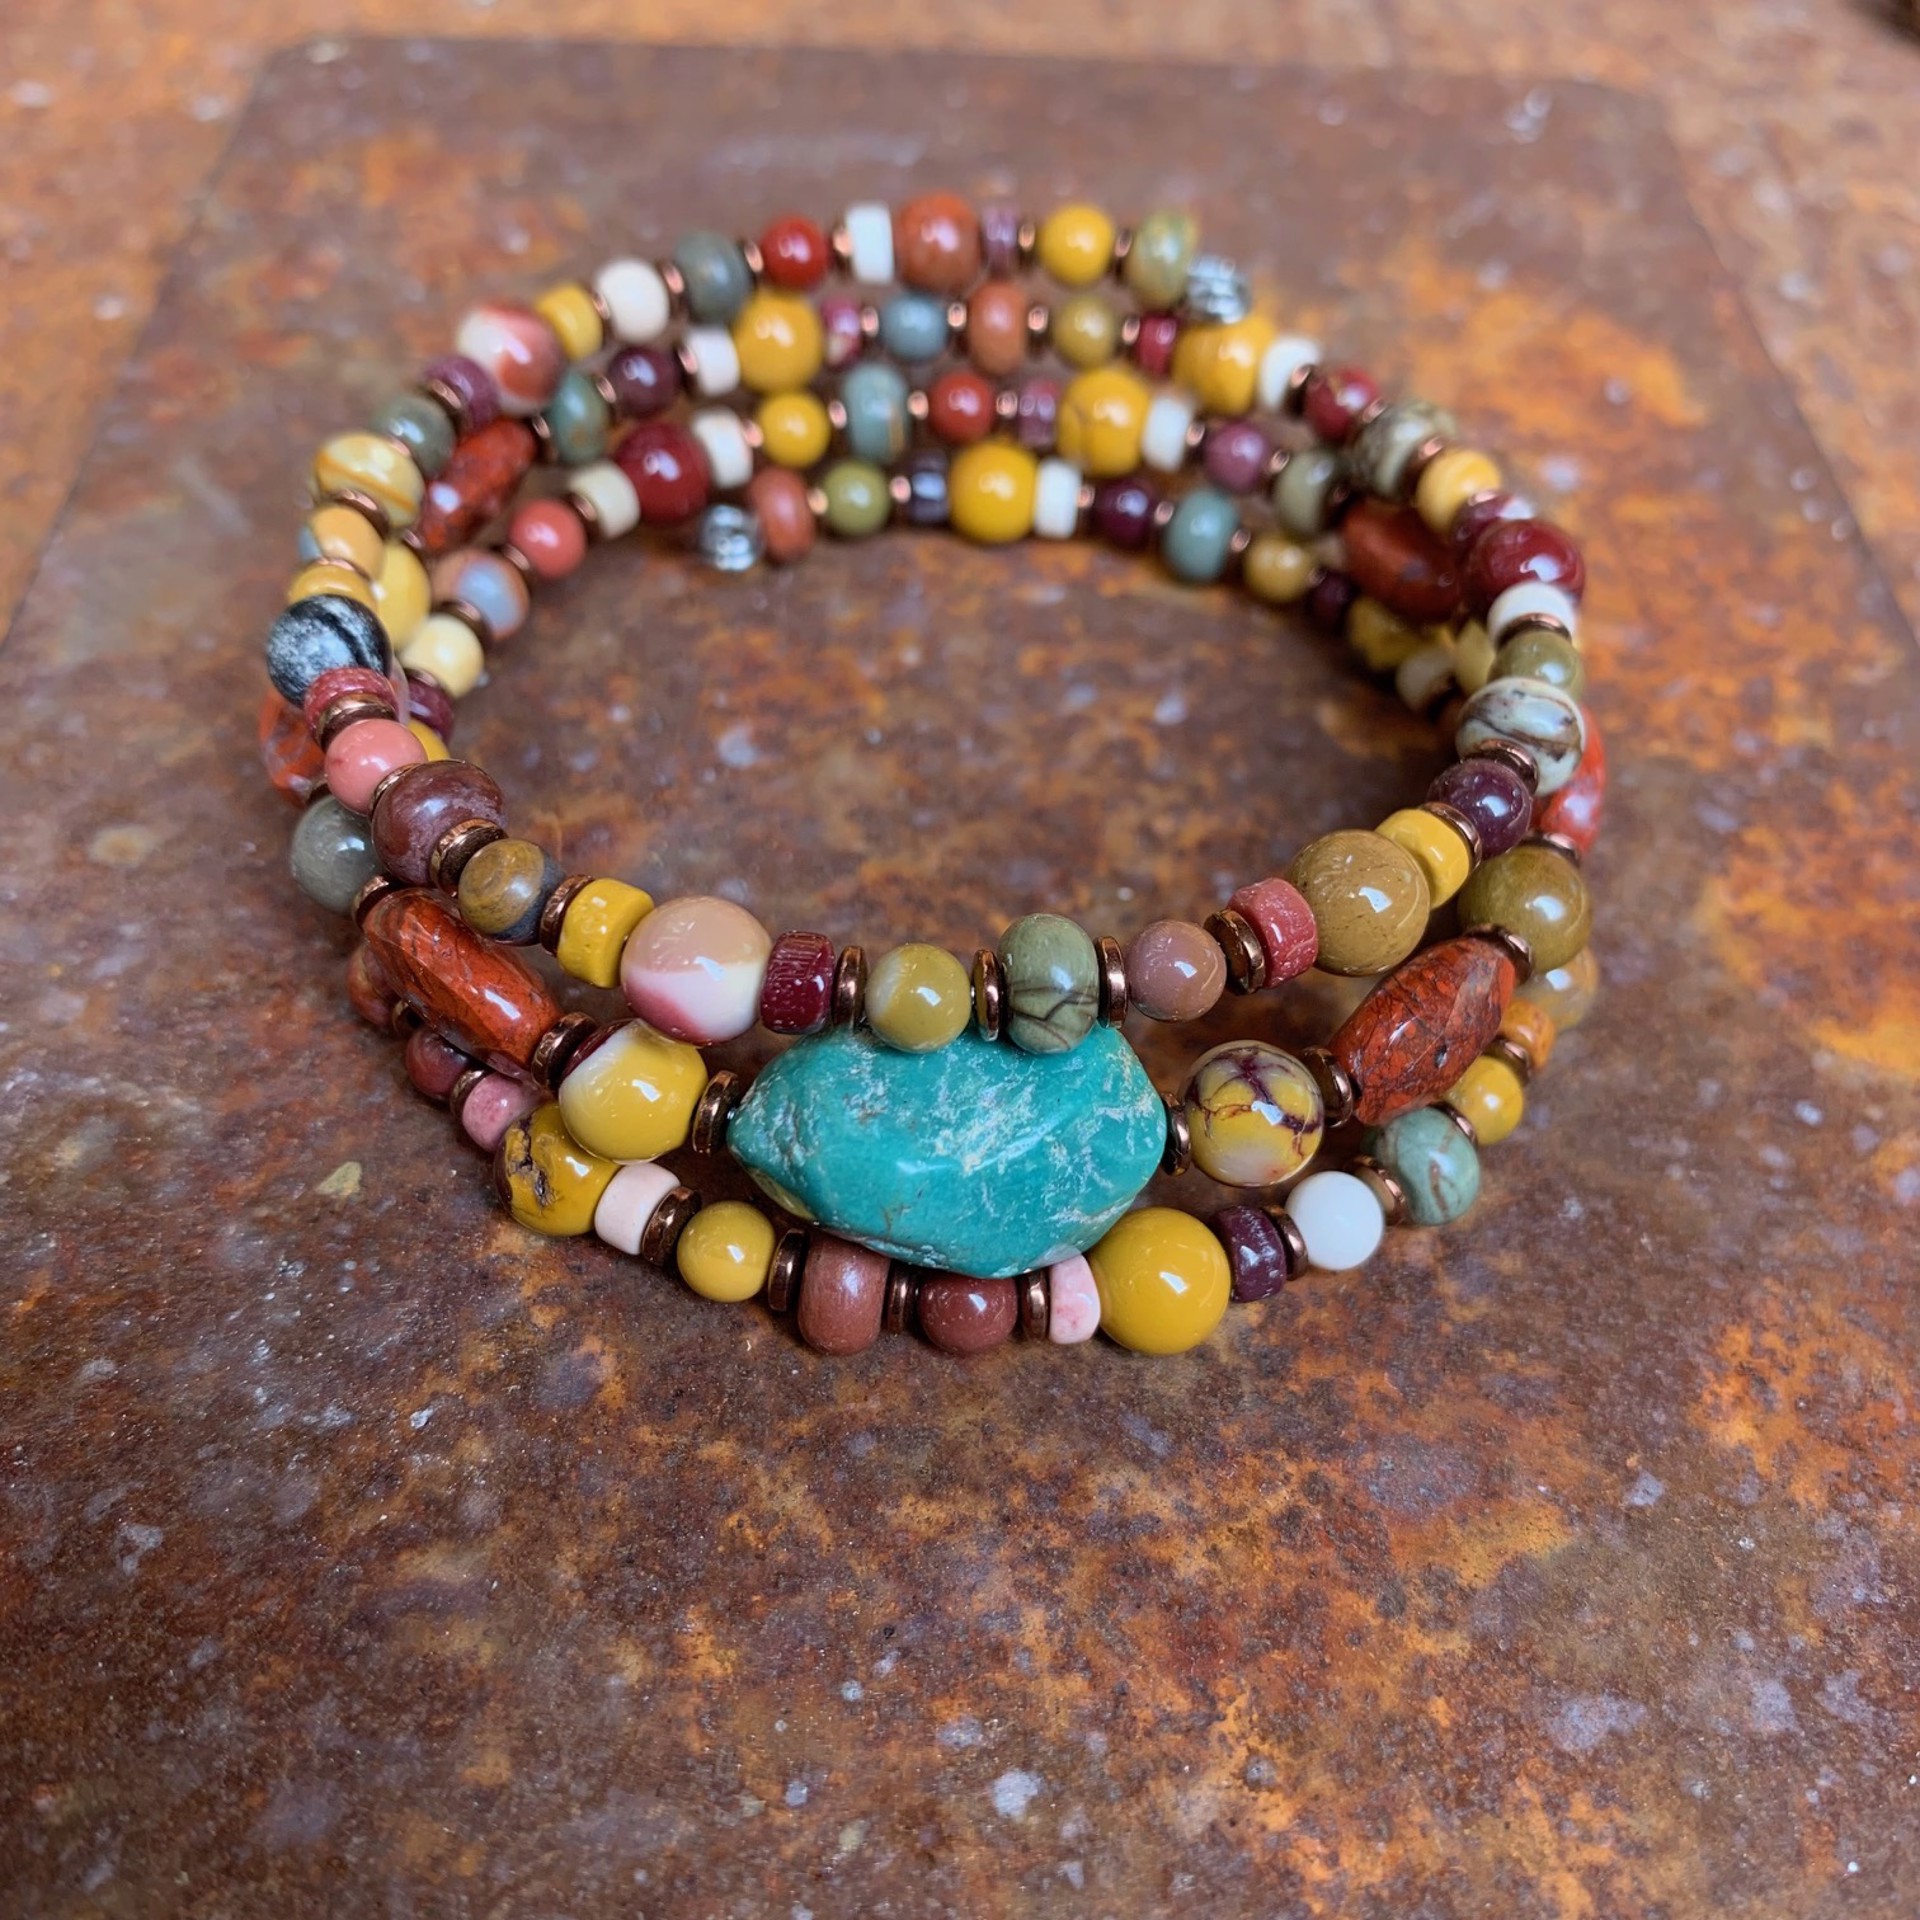 K742 Mookaite and Turquoise Triple Wrap Bracelet by Kelly Ormsby